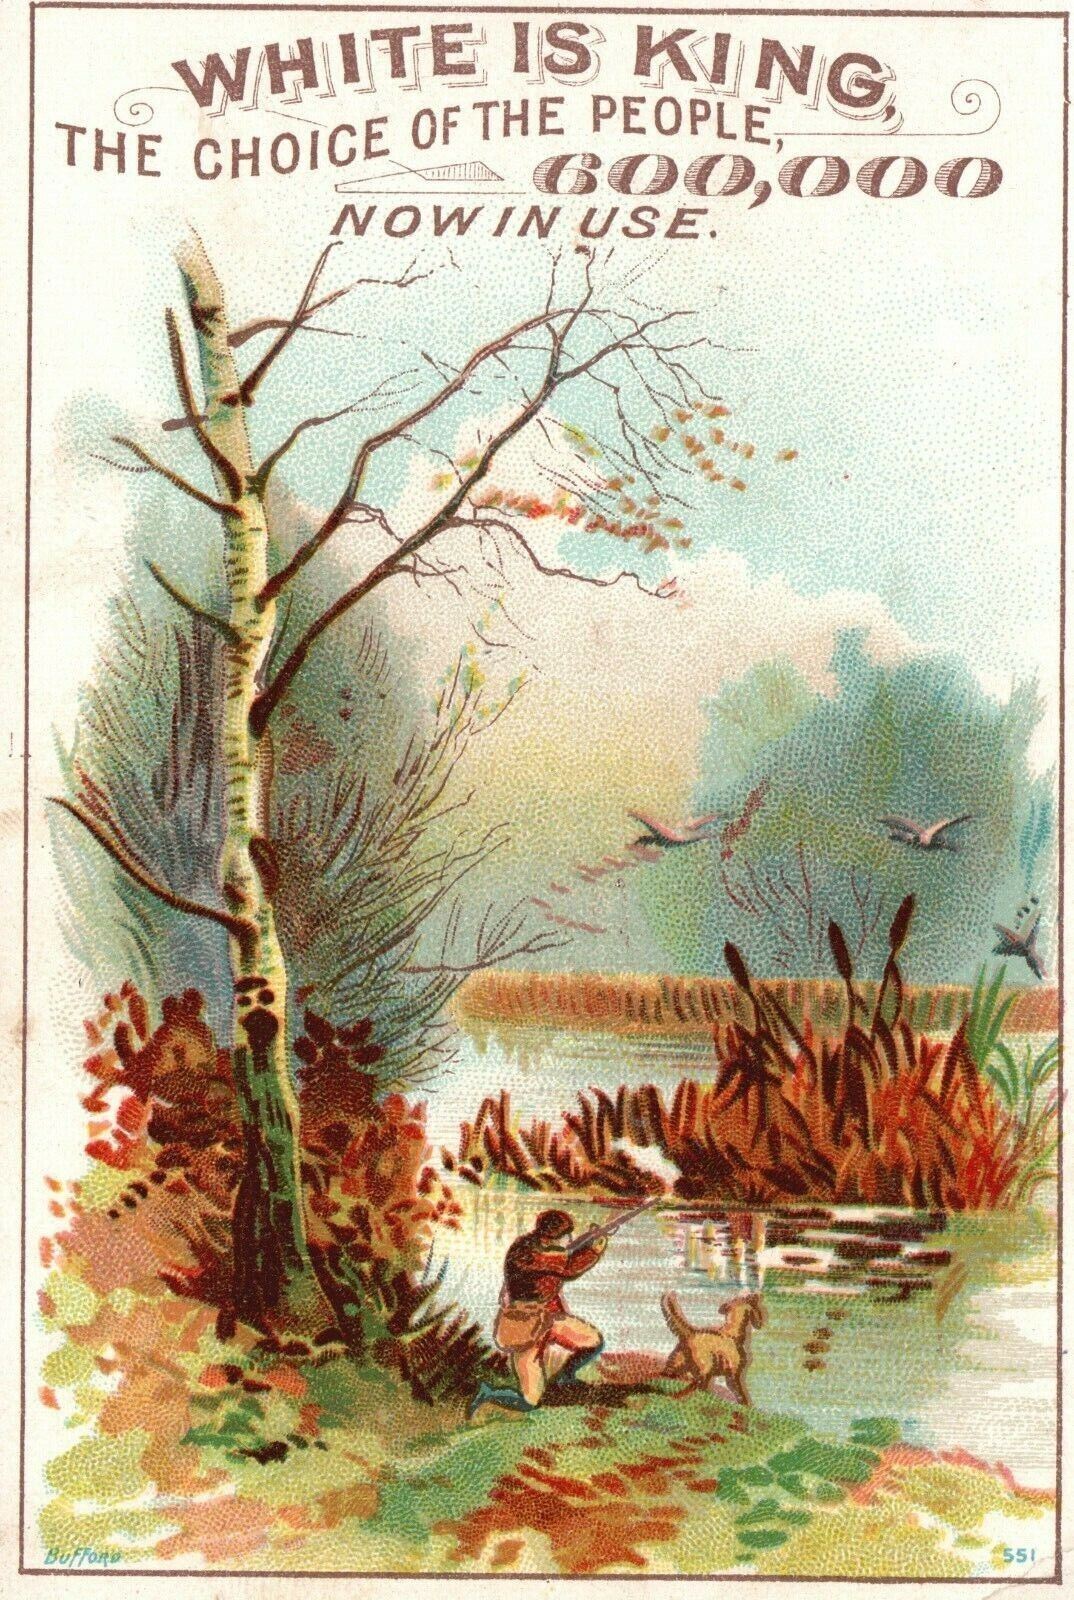 1880s-90s Bird Hunter with Dog White is King Sewing Machines Trade Card